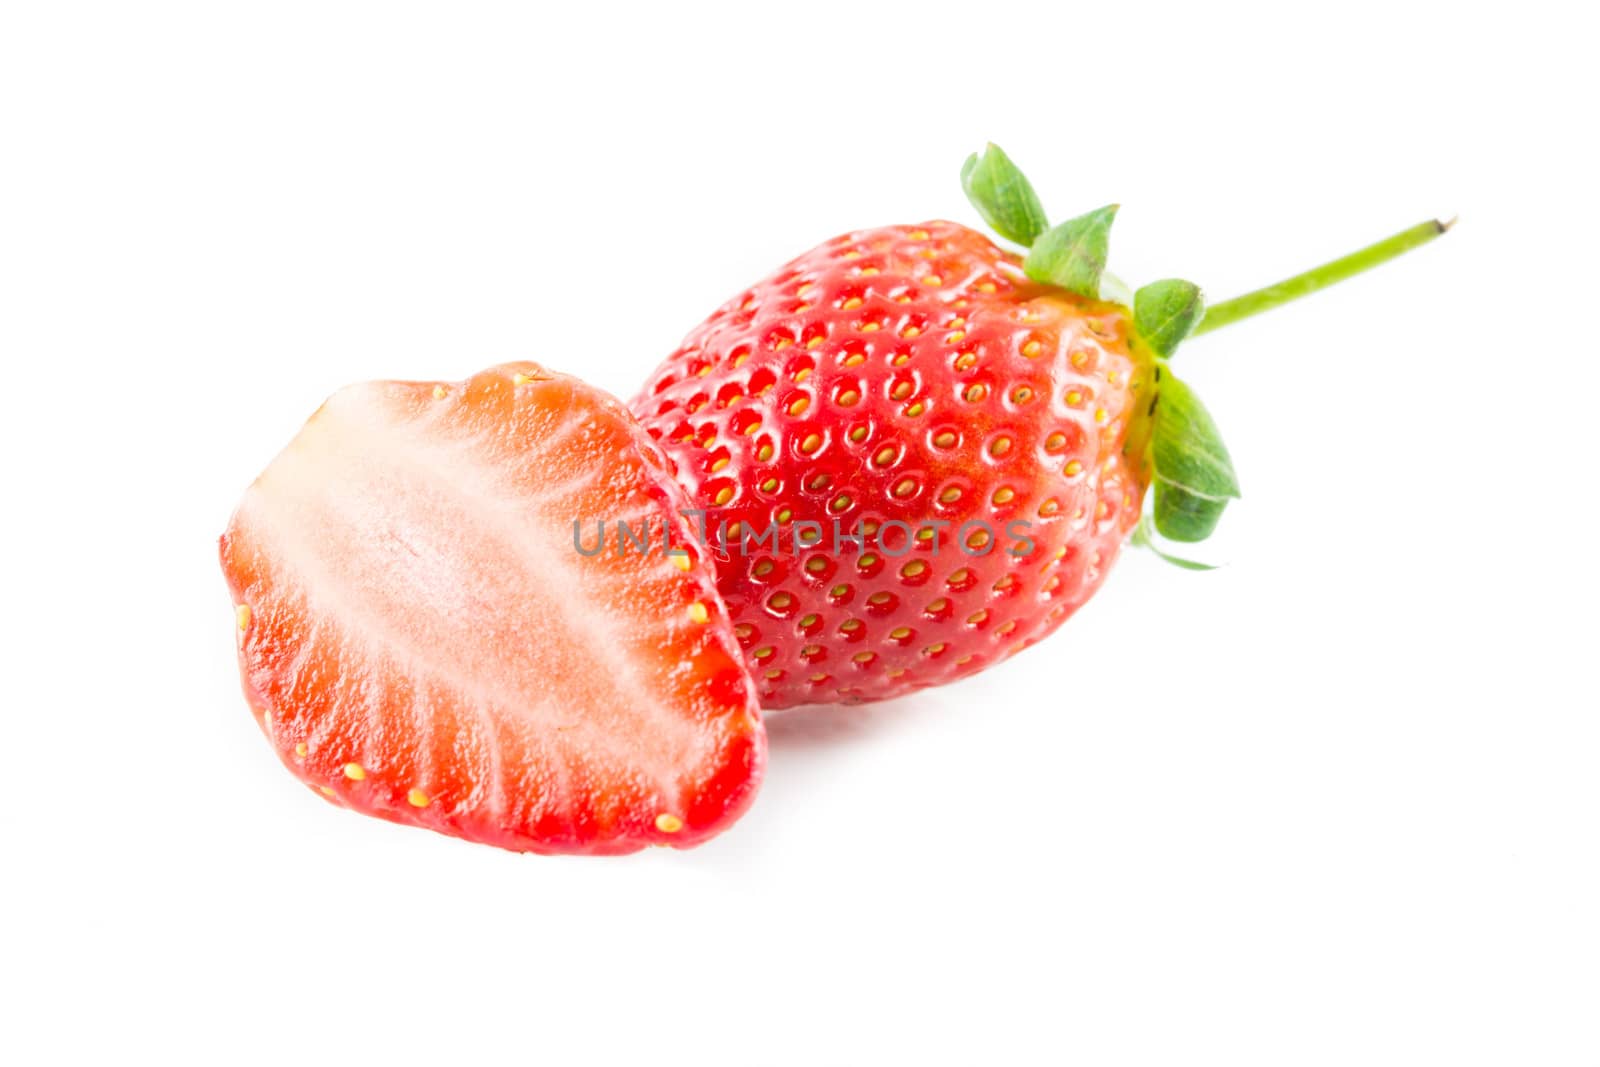 Fresh strawberries isolate on a white background